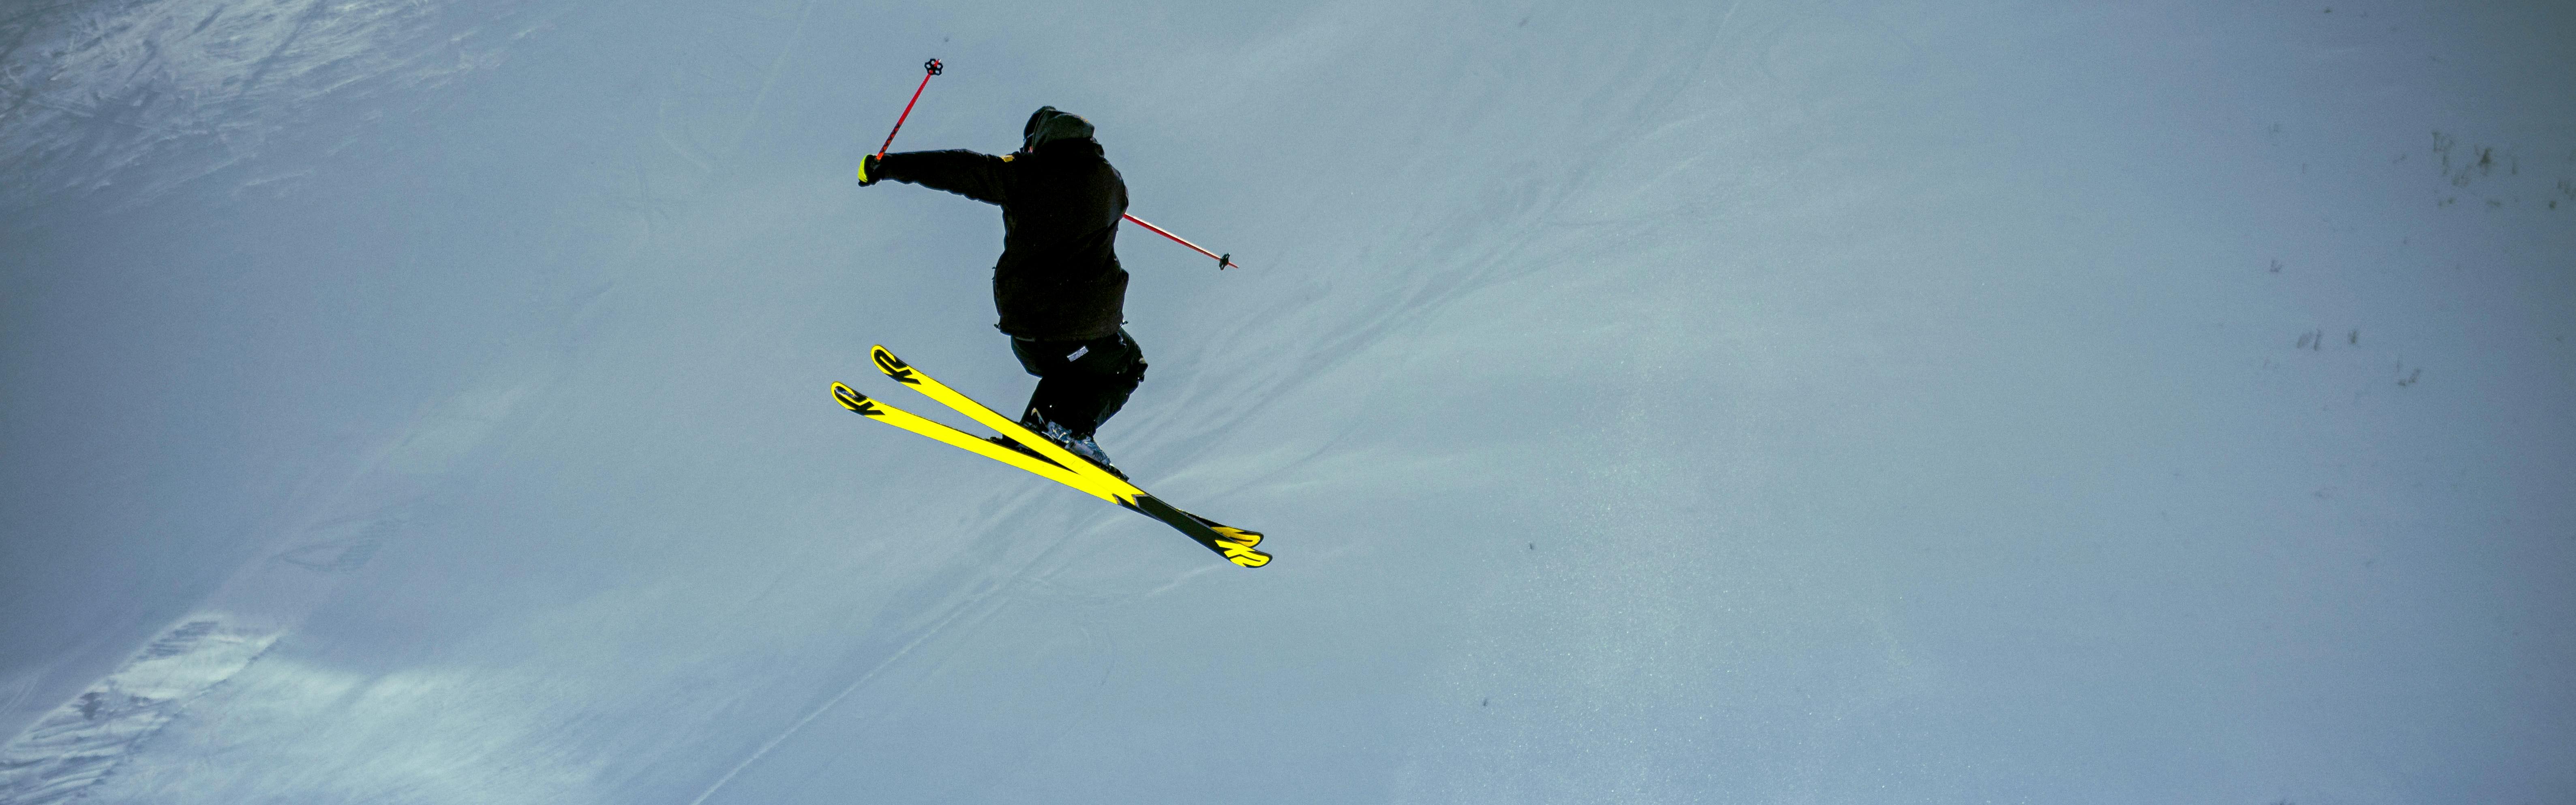 A skier on twin tip skis flying through the air in a jump